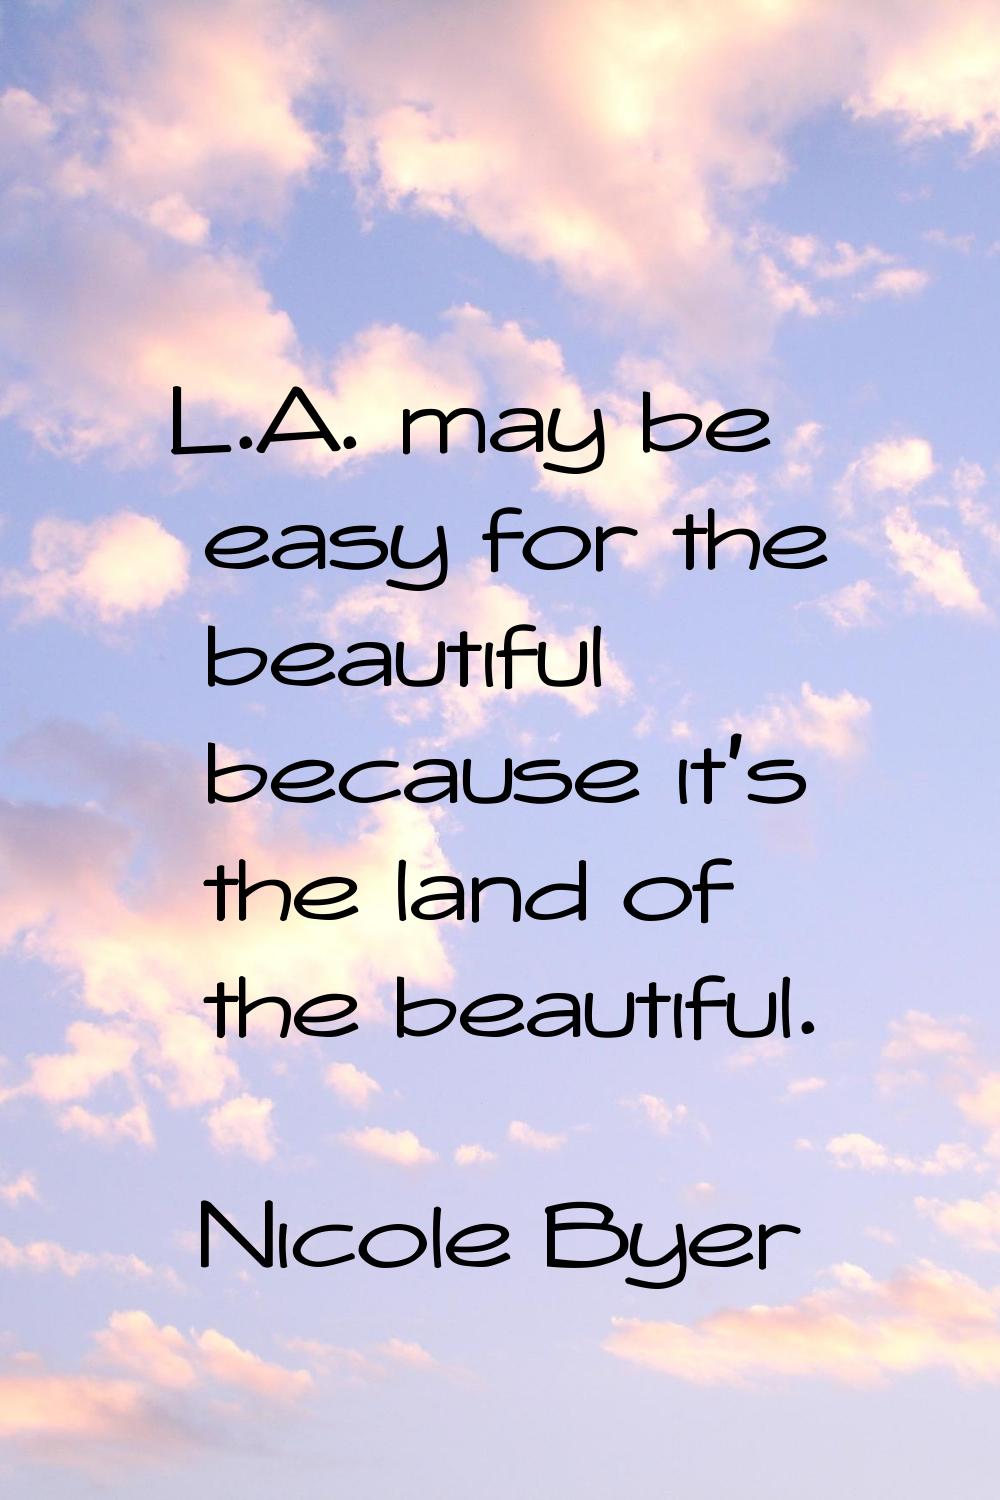 L.A. may be easy for the beautiful because it's the land of the beautiful.